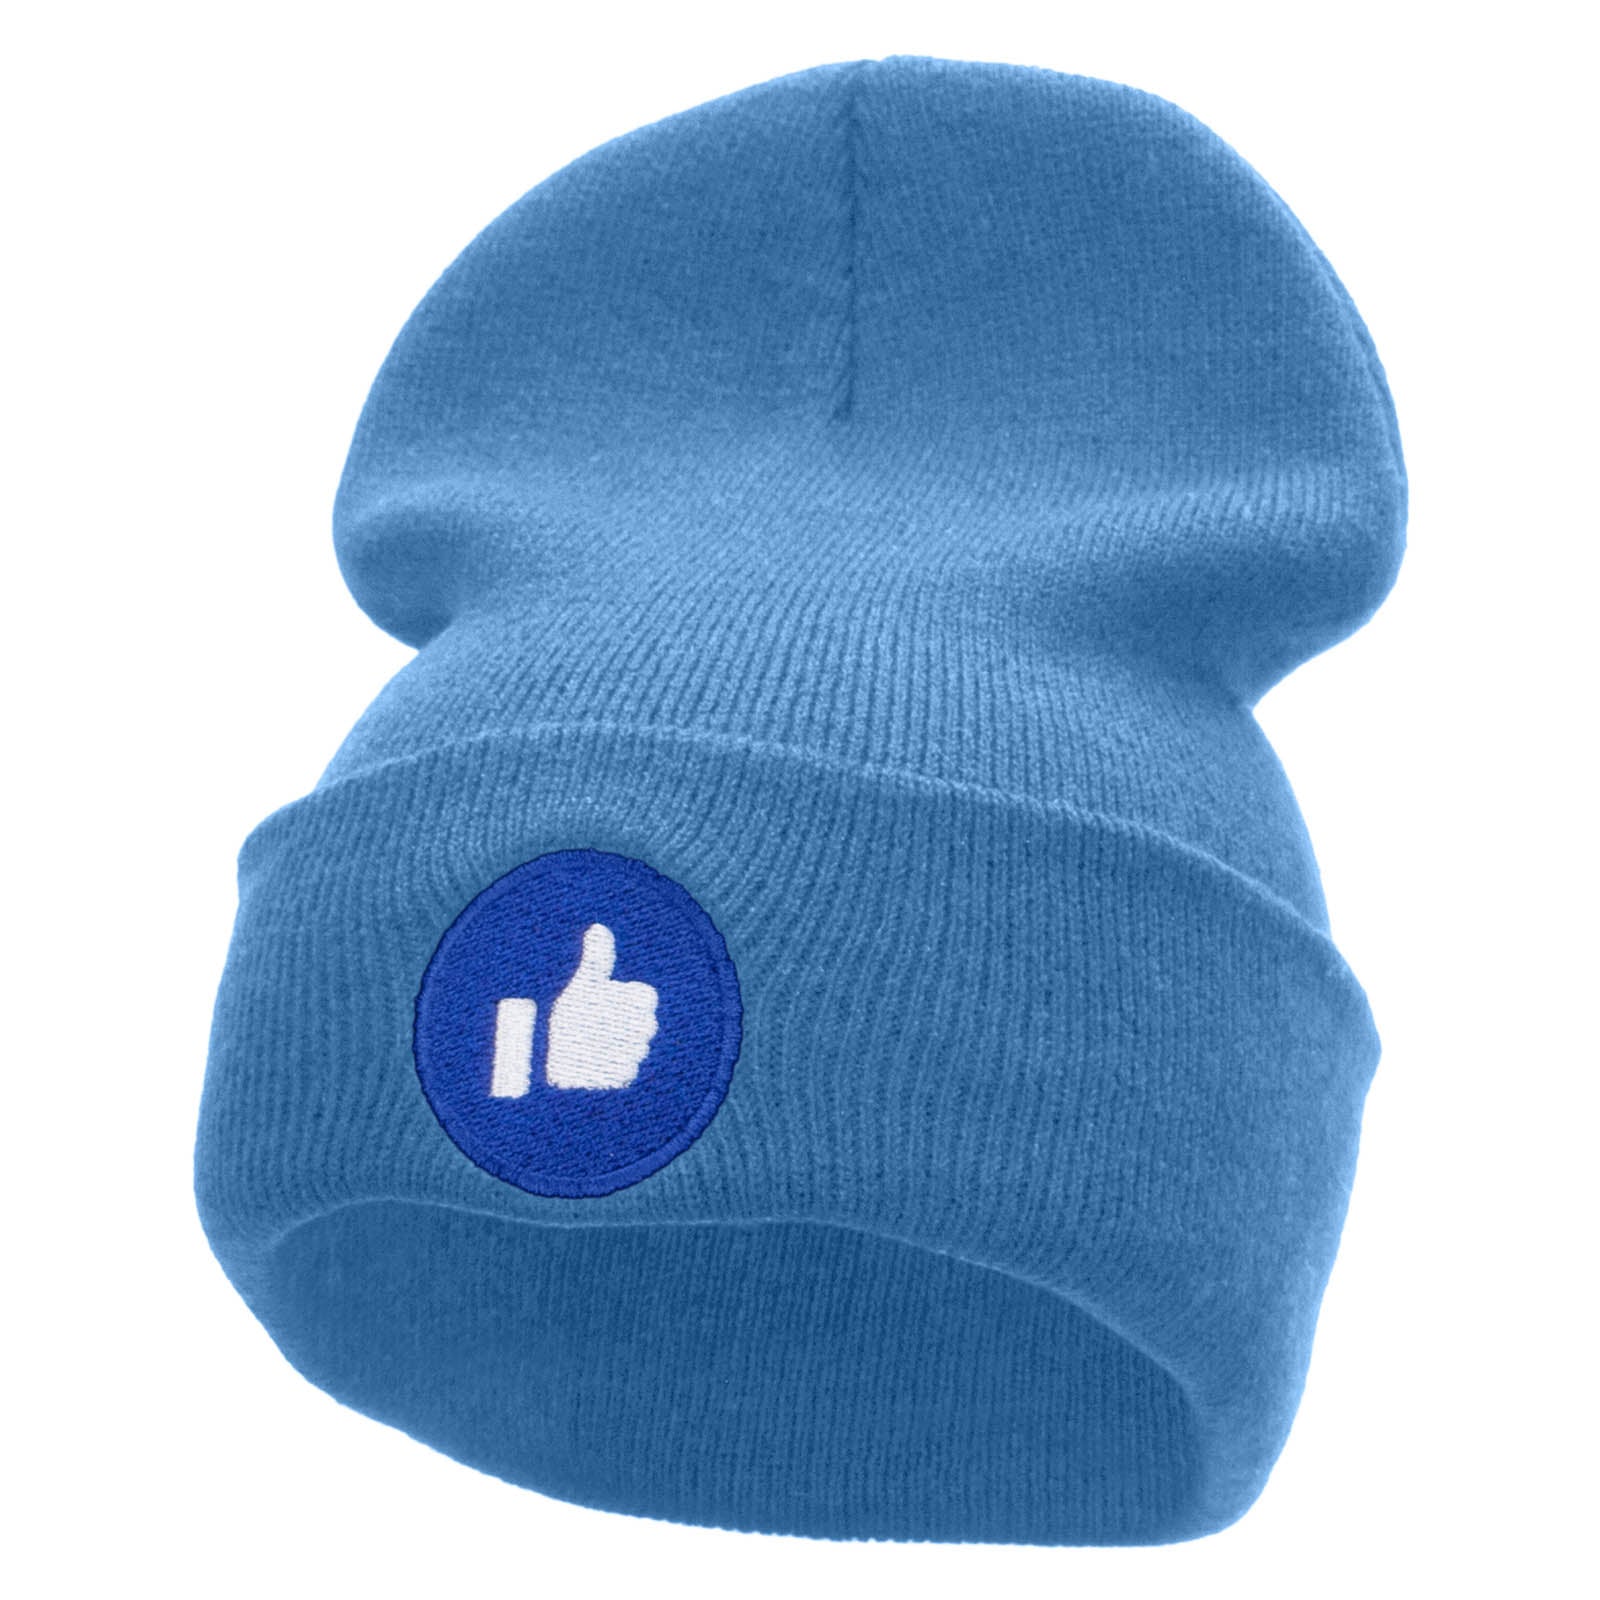 Give Thumbs Up Embroidered 12 Inch Long Knitted Beanie - Sky Blue OSFM